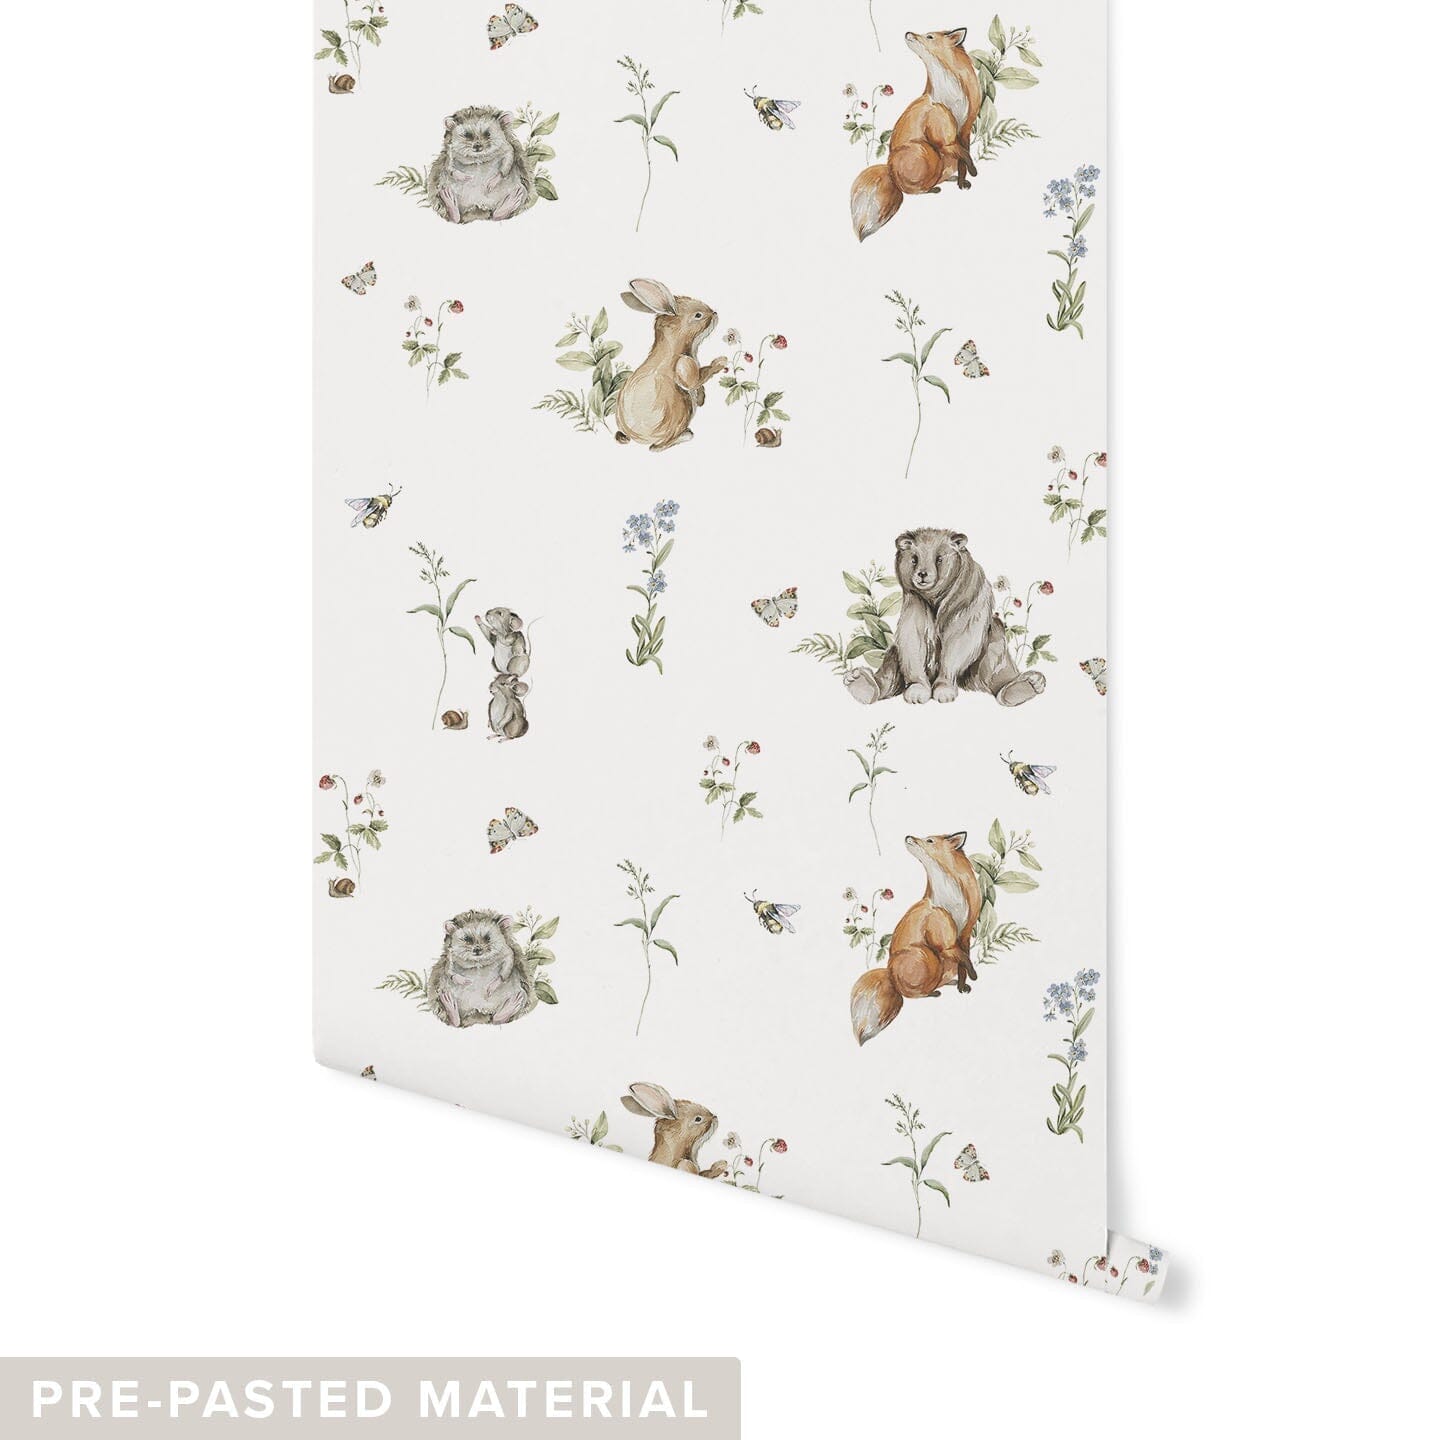 Woodland Animal Wallpaper Wallpaper Urbanwalls Pre-pasted DOUBLE ROLL : 46" X 4 FEET 